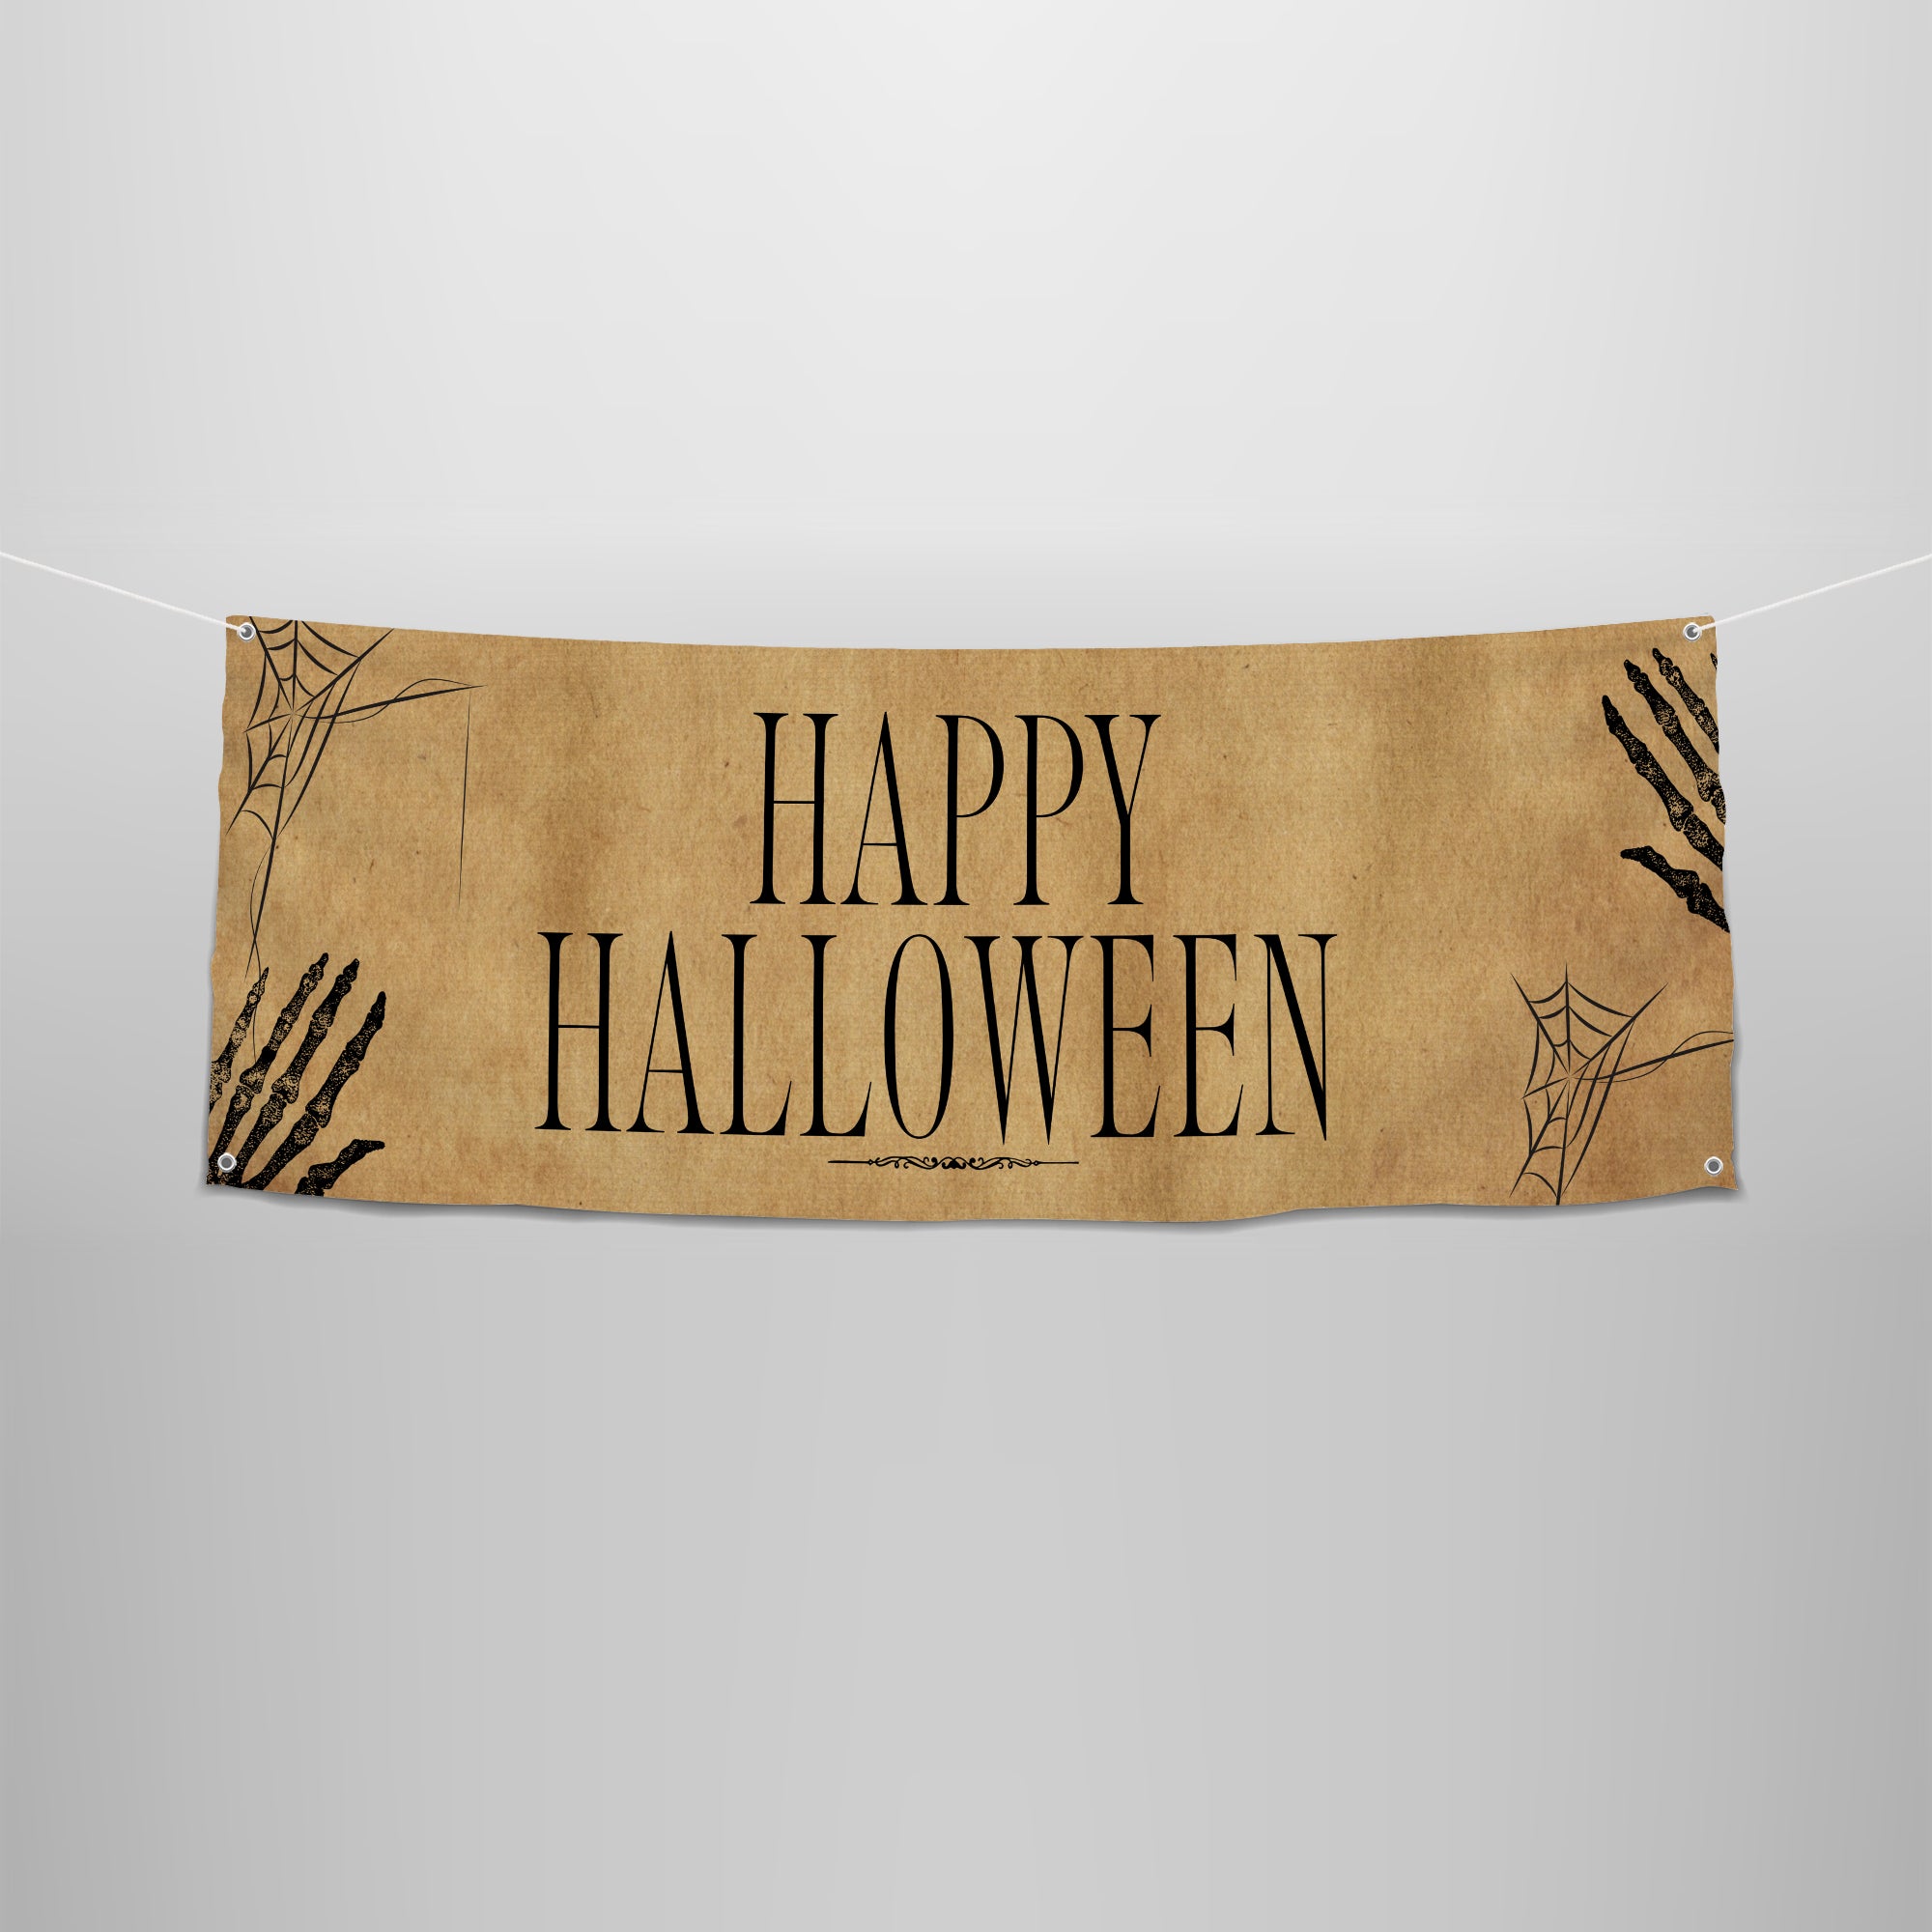 Happy Halloween Old Paper Sign Banner - Vintage Revival, Durable Construction, Unmatched Aesthetic